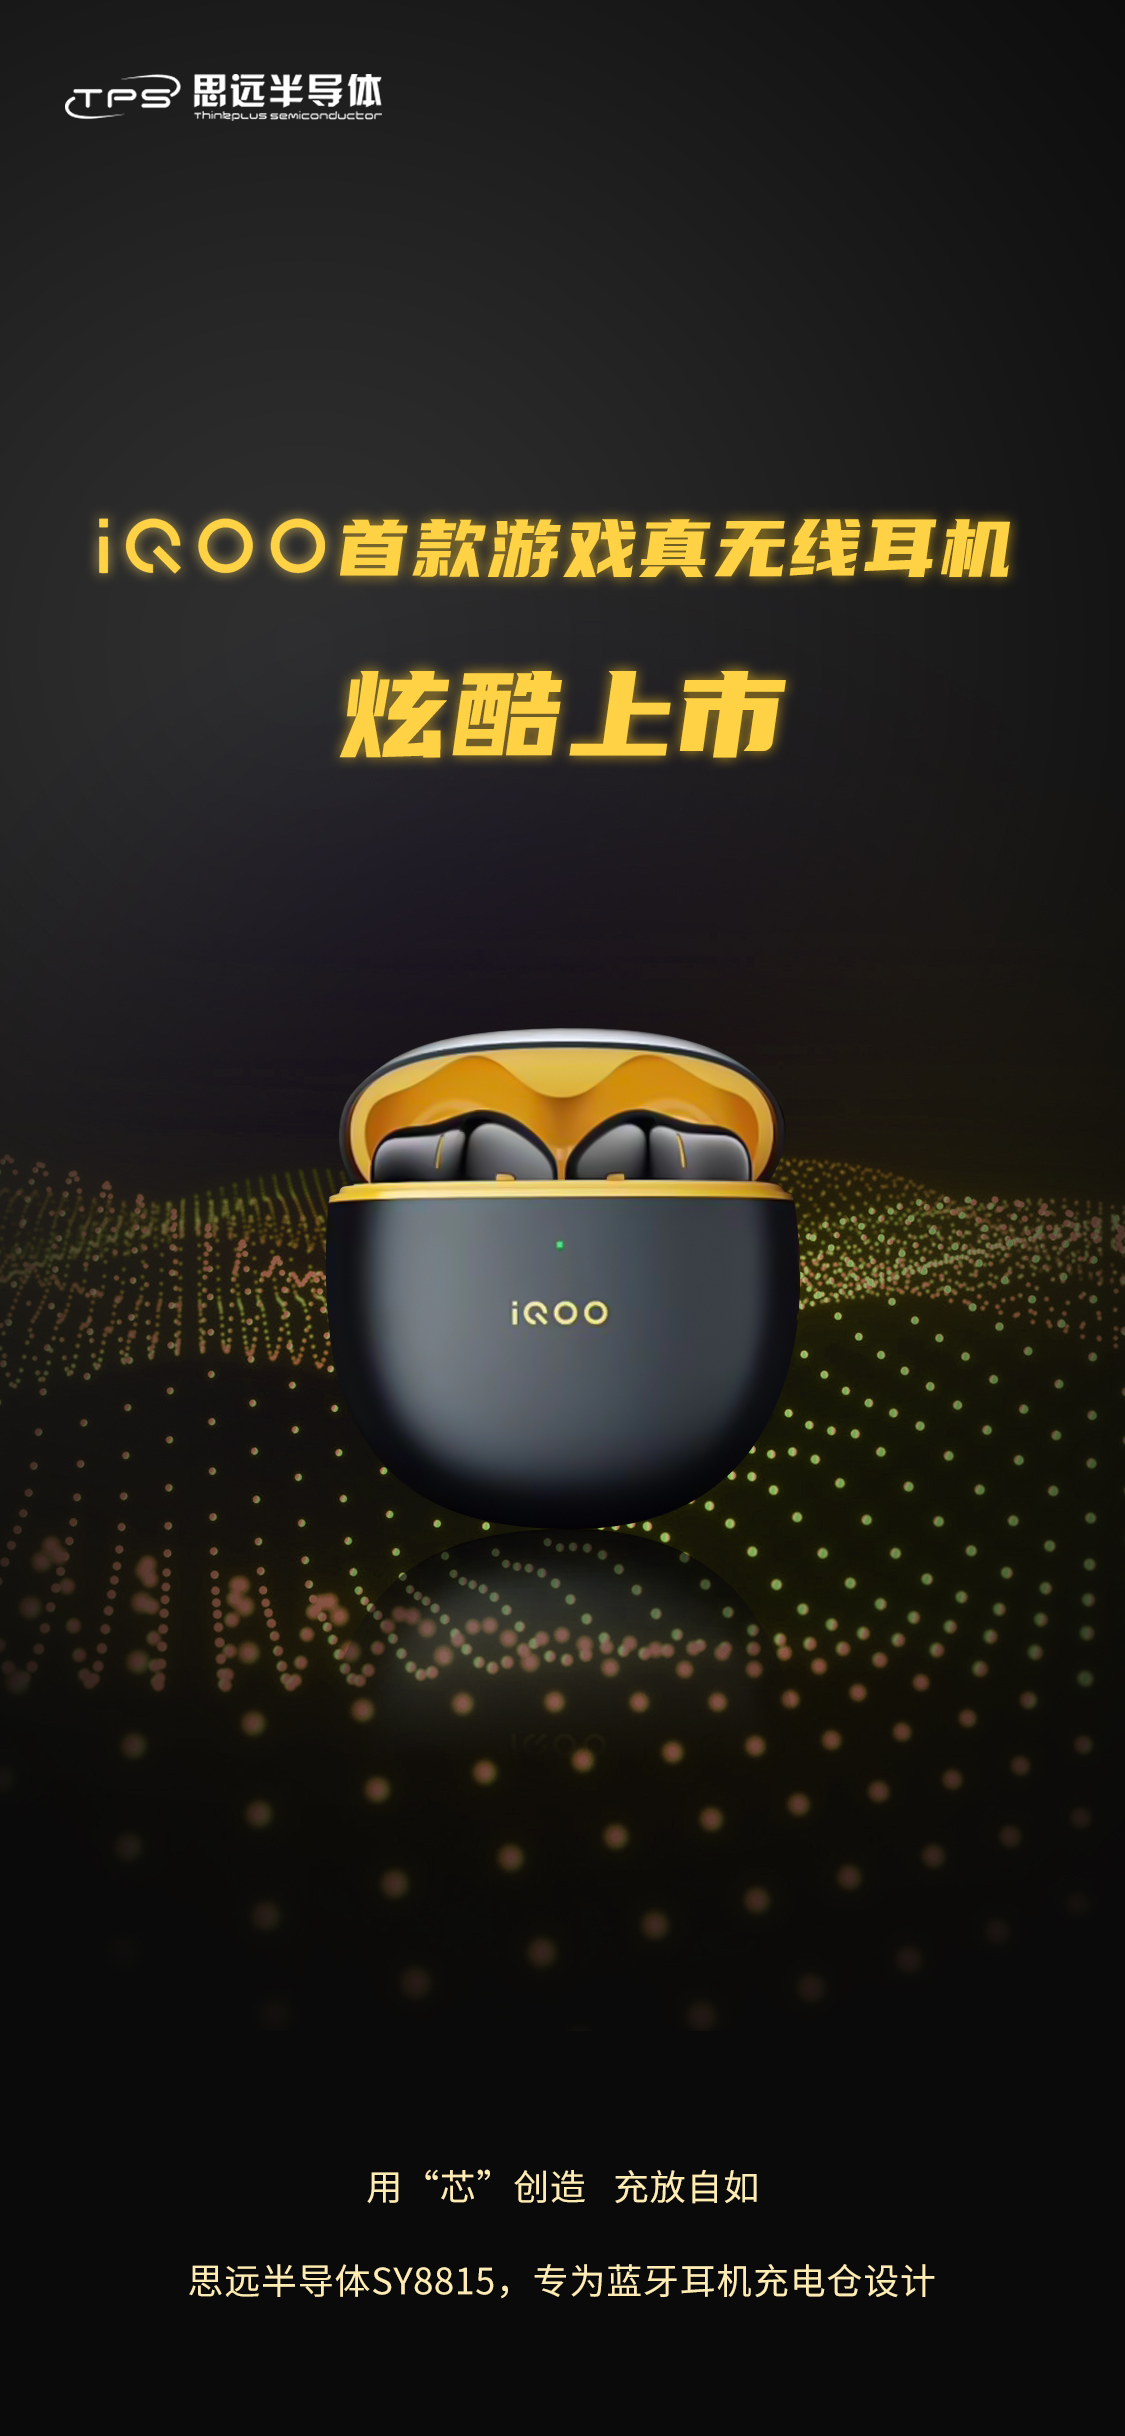 Commercial Use | Congratulations on the Release of iQOO's First TWS Gaming Earbuds Using the Cradle PMIC from Thinkplus Semiconductor